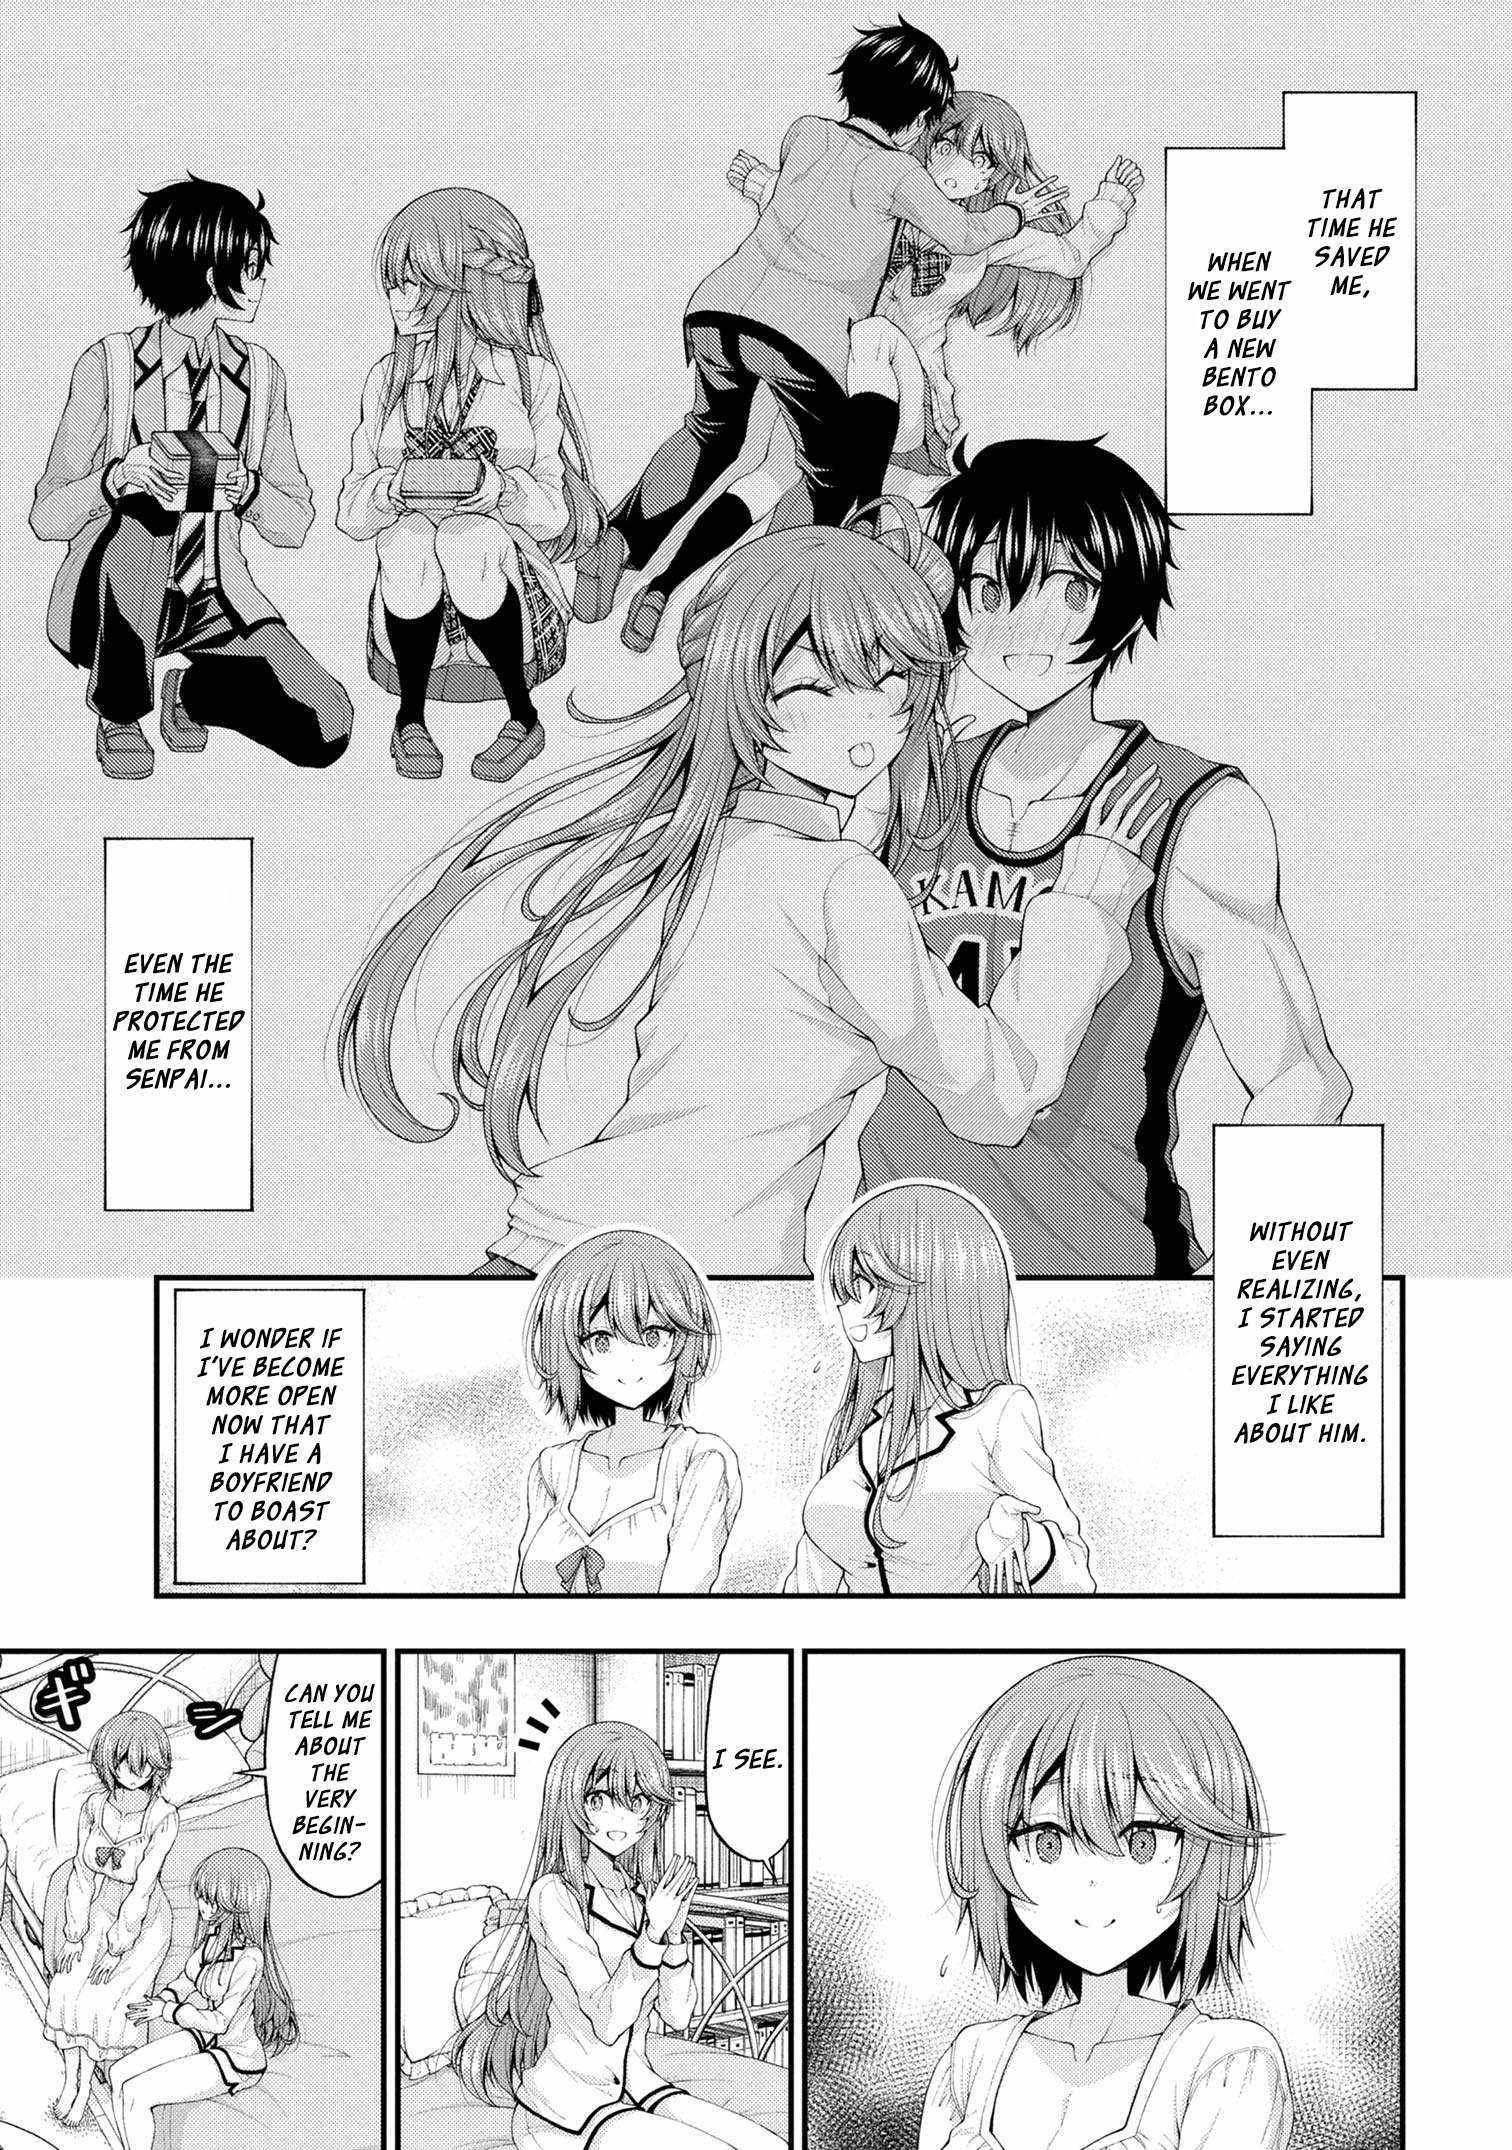 The Gal Who Was Meant to Confess to Me as a Game Punishment Has Apparently Fallen in Love with Me Chapter 12-5-eng-li - Page 12